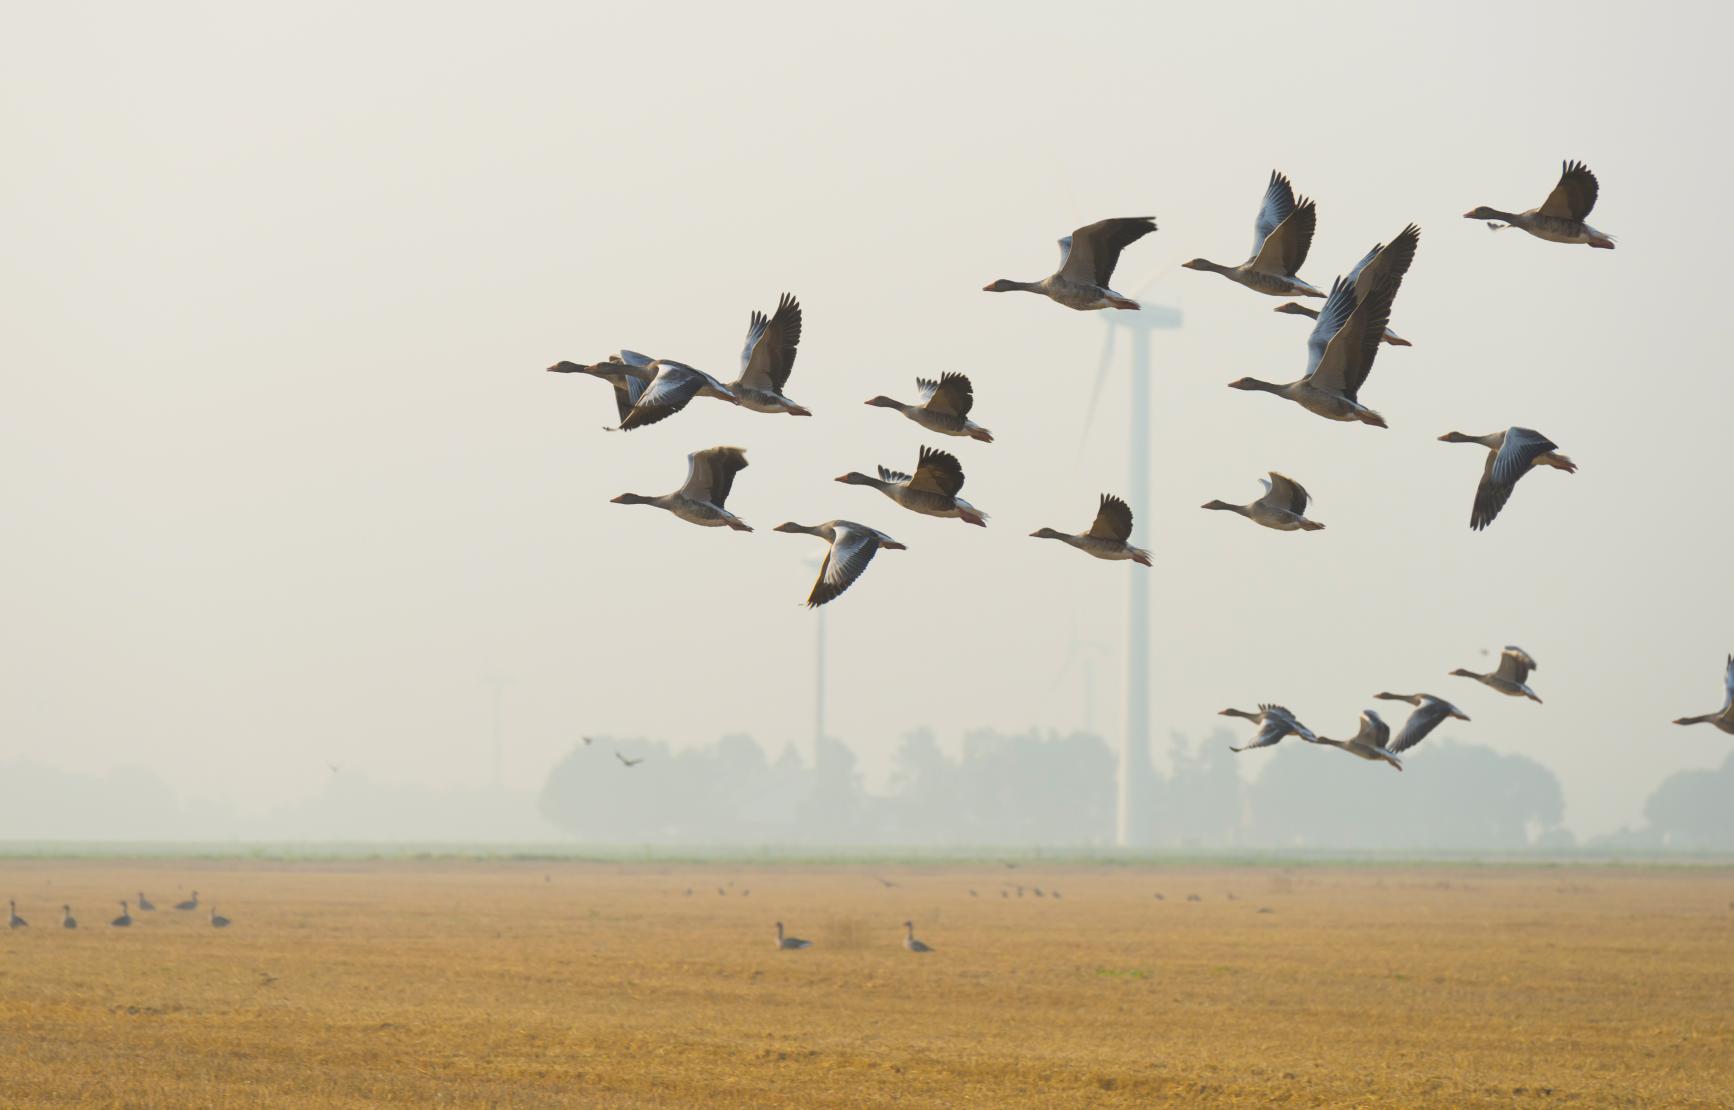 A flock of birds flying in the foreground with windmills in the background